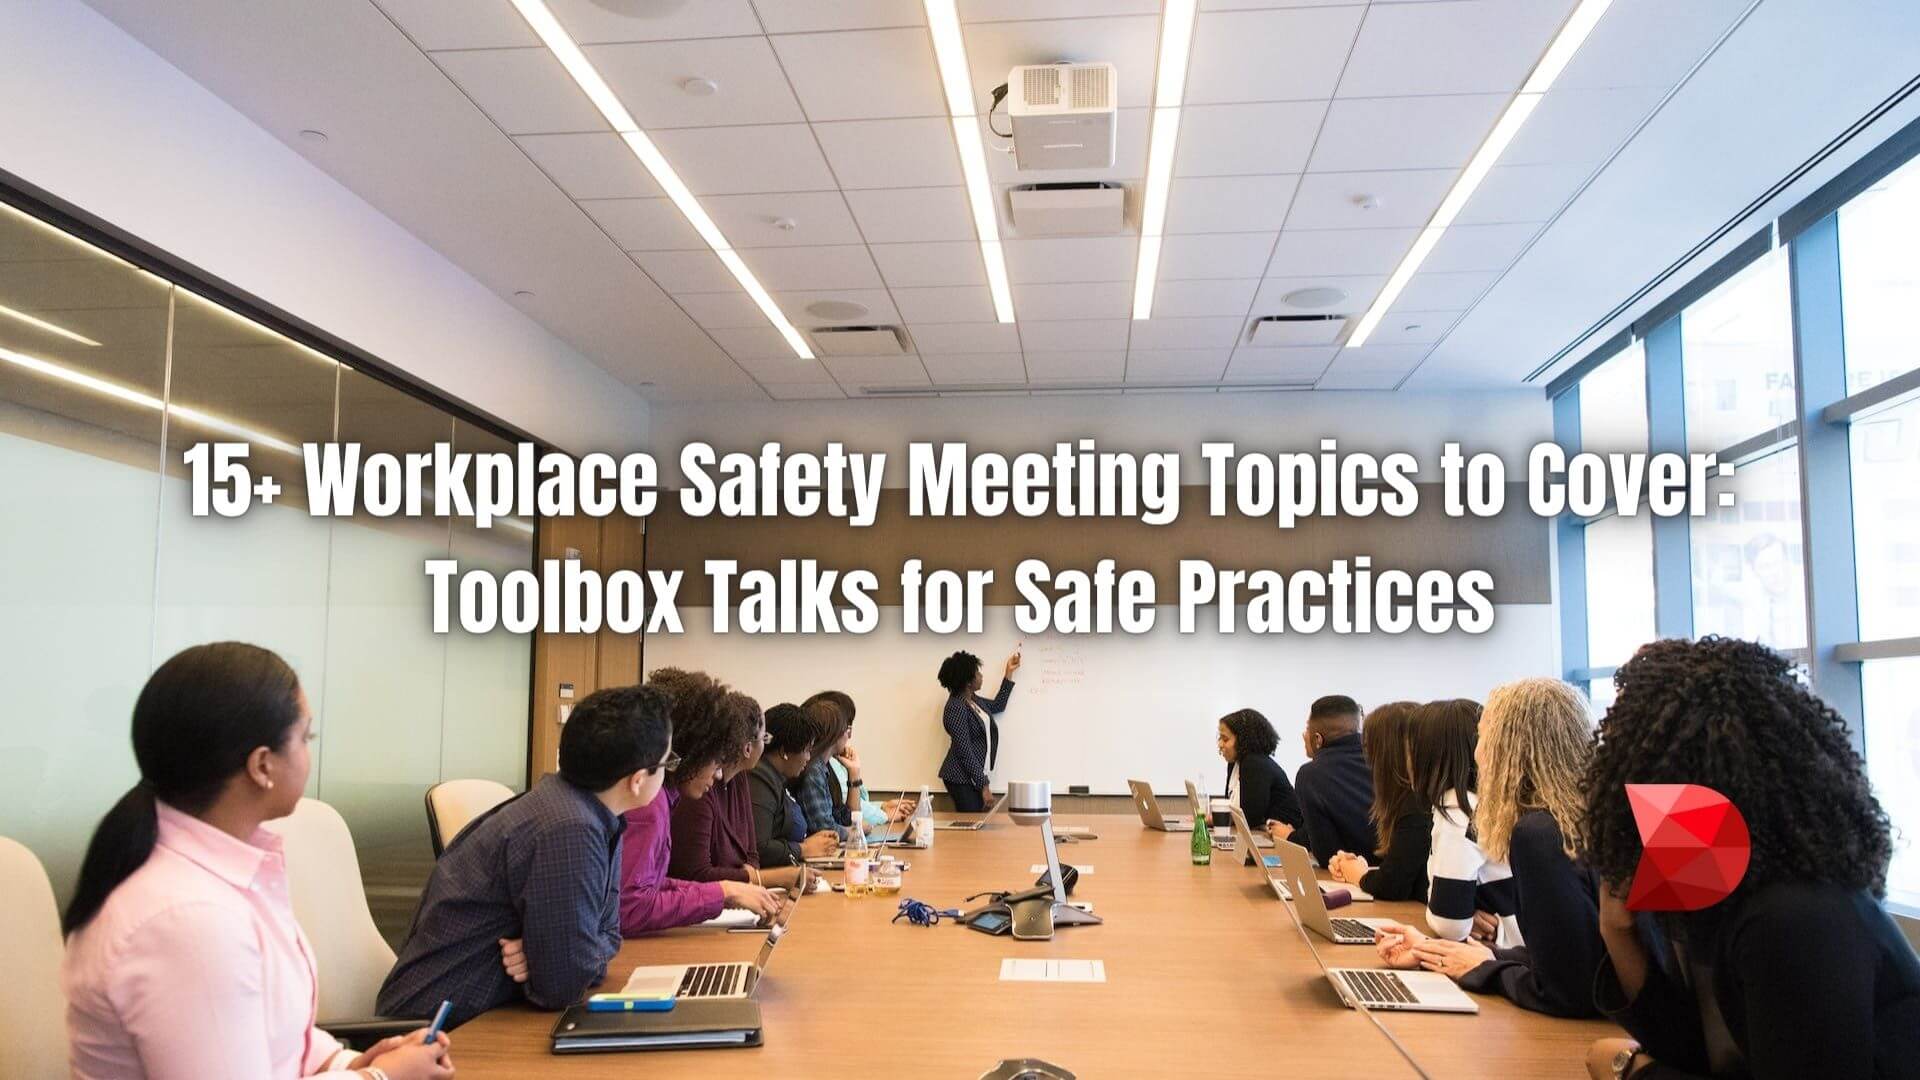 Keep your team protected and informed. Click here to discover 15+ key safety topics for work meetings with our comprehensive guide.